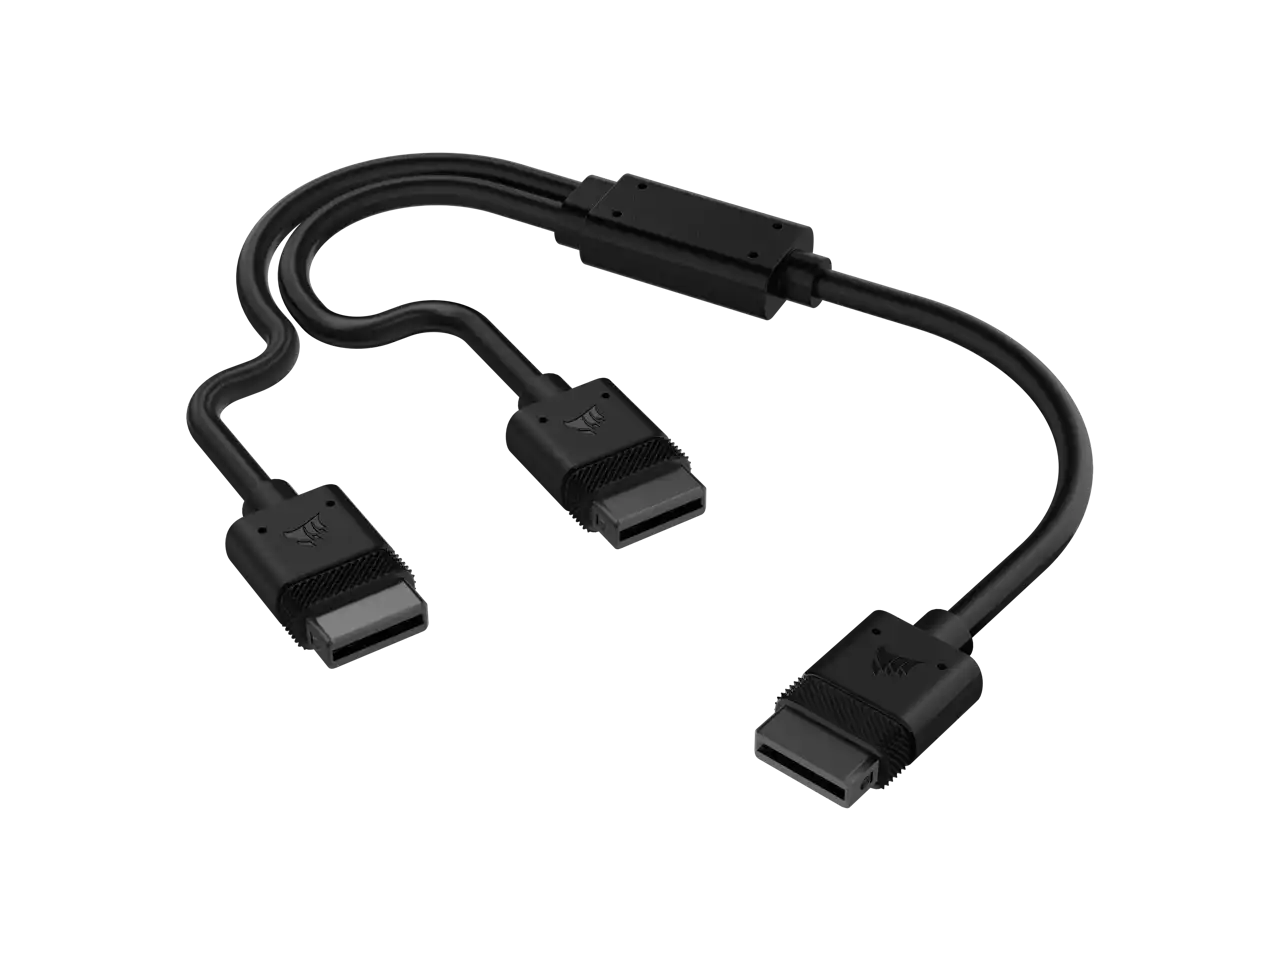 Corsair iCUE LINK Cable, 1x 600mm Y-Cable with Straight connectors, Black|CL-9011124-WW